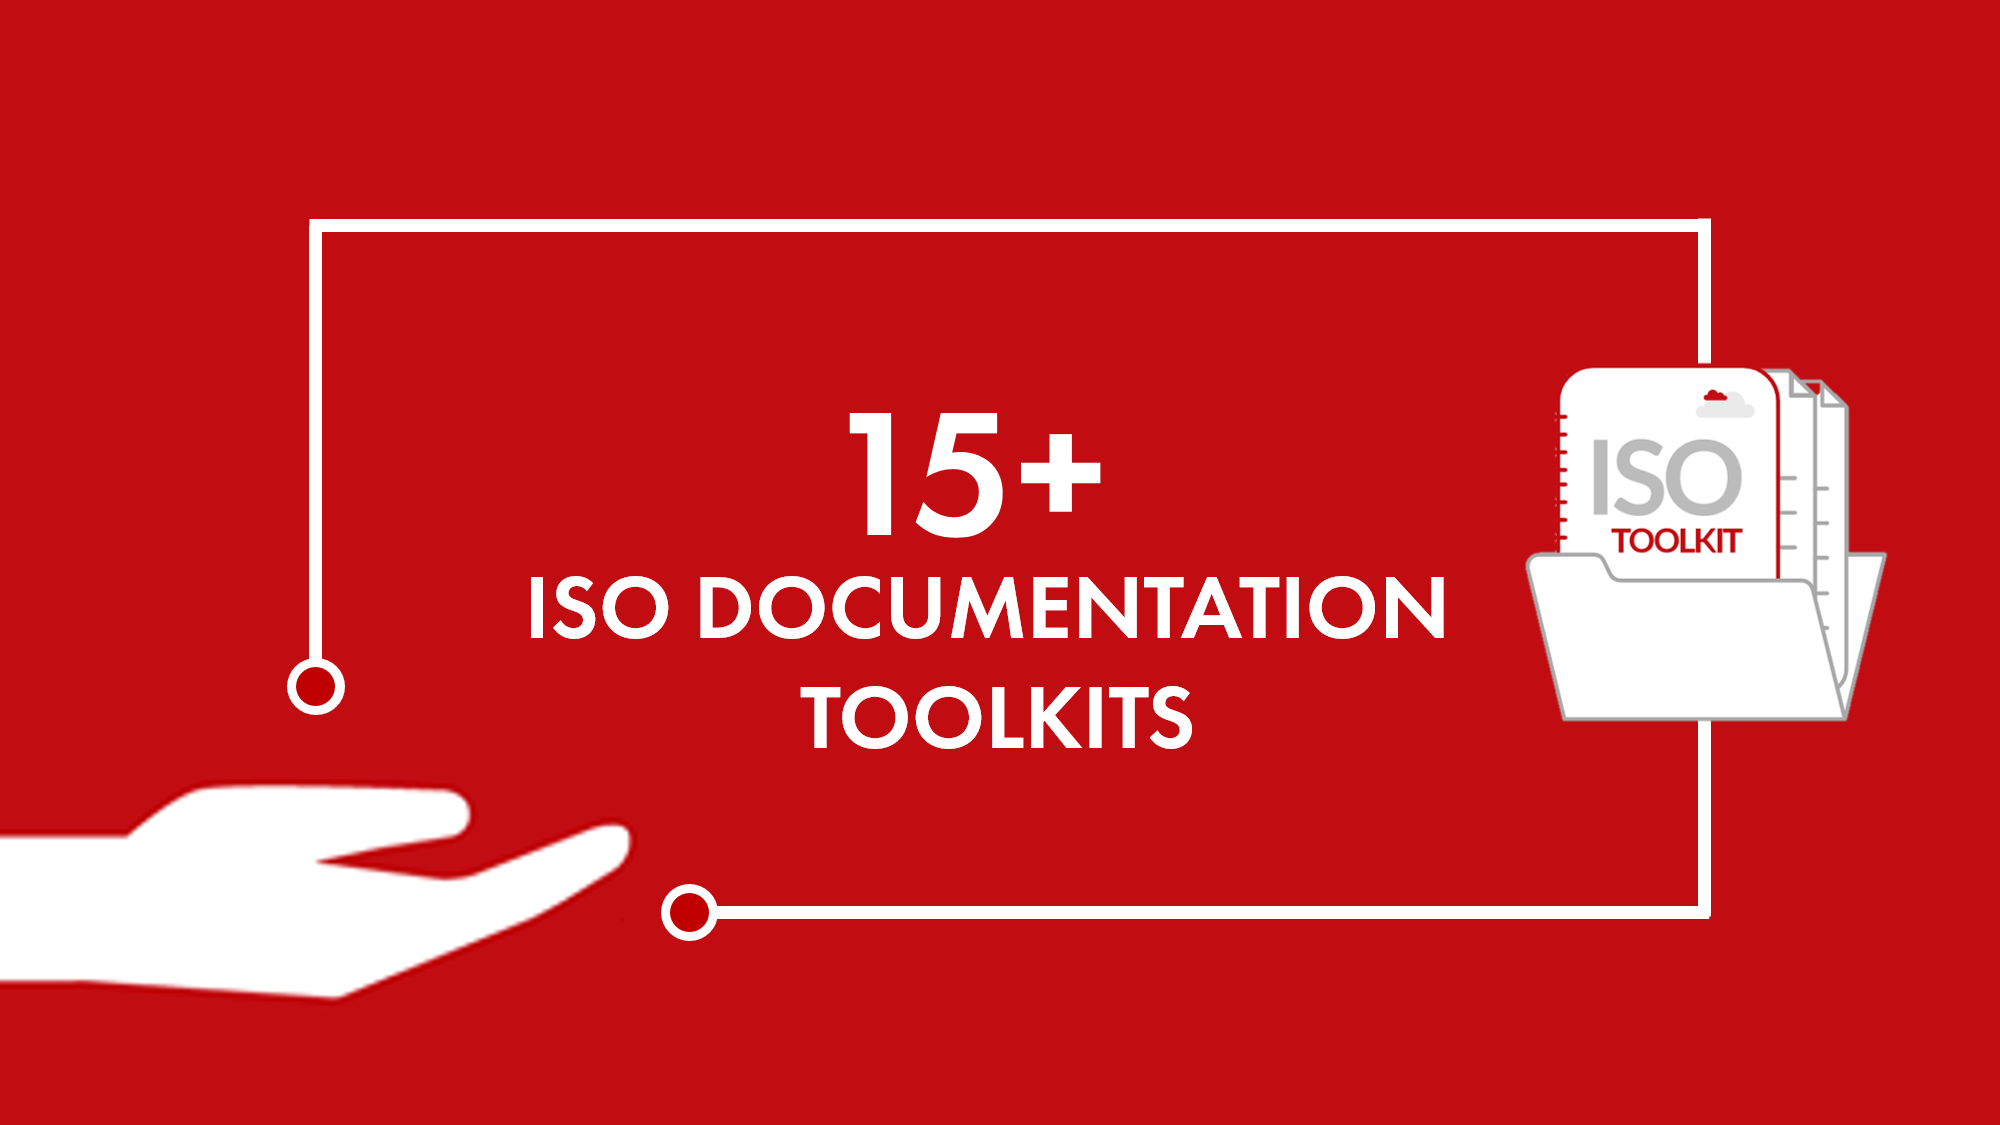 What is ISO Toolkits & How they helps in Implementation?